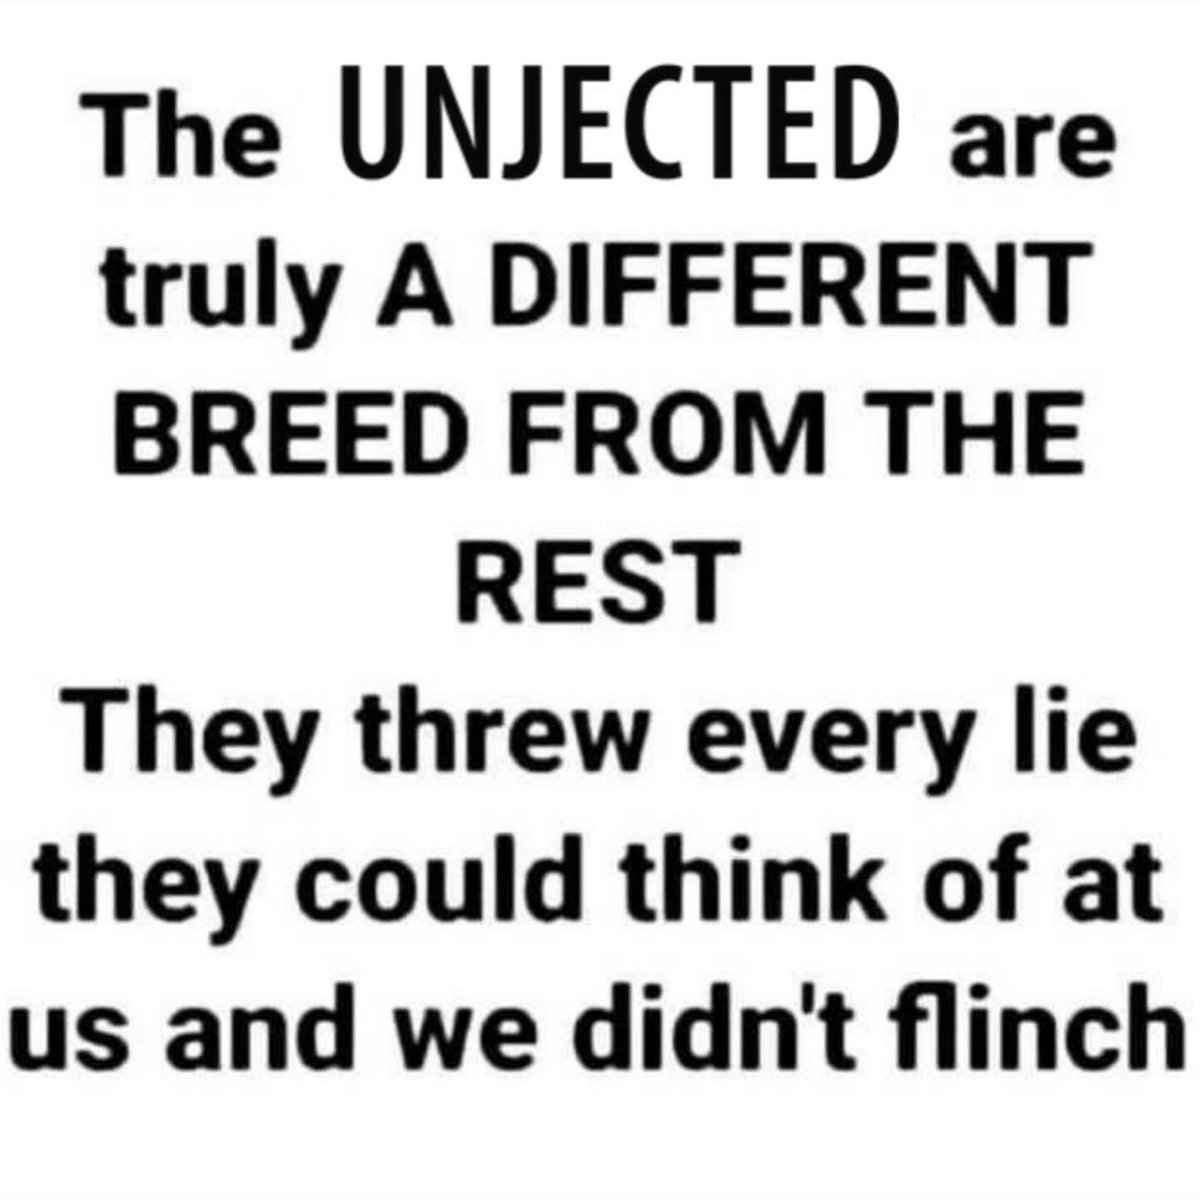 Find your likeminded, health-conscious people who stood up against tyranny. ❌💉 #unjected convictions are like no other 🧬👇🏼 unjected.com